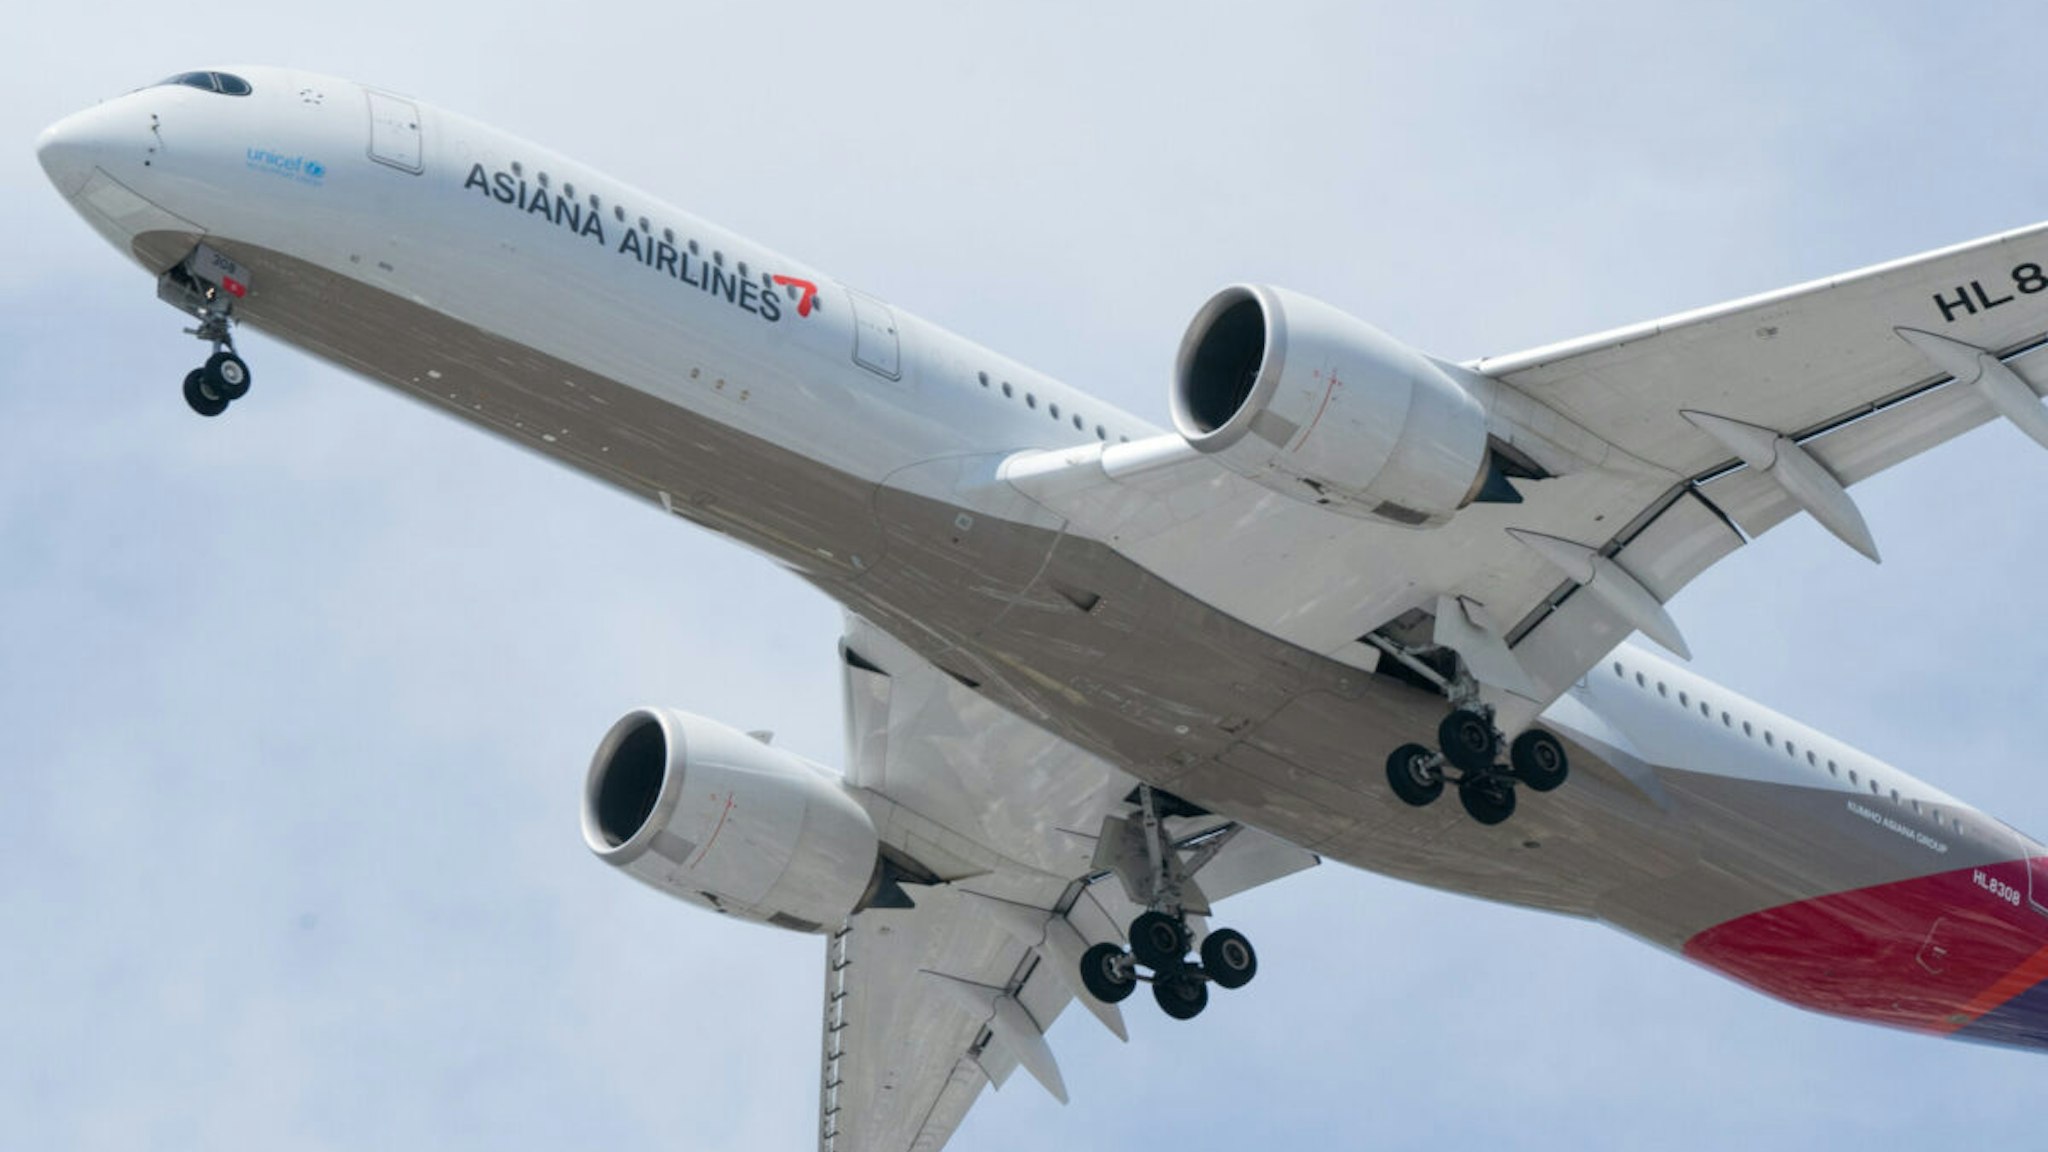 An Airbus A350-900 jetliner aircraft operated by Asiana Airlines Inc makes a descent into Los Angeles International Airport (LAX) in Los Angeles, California, U.S., on Friday, May 28, 2021. The days of bargain basement airfares are ending as the U.S. vaccine supply unleashes a wave of pent-up travel demand.